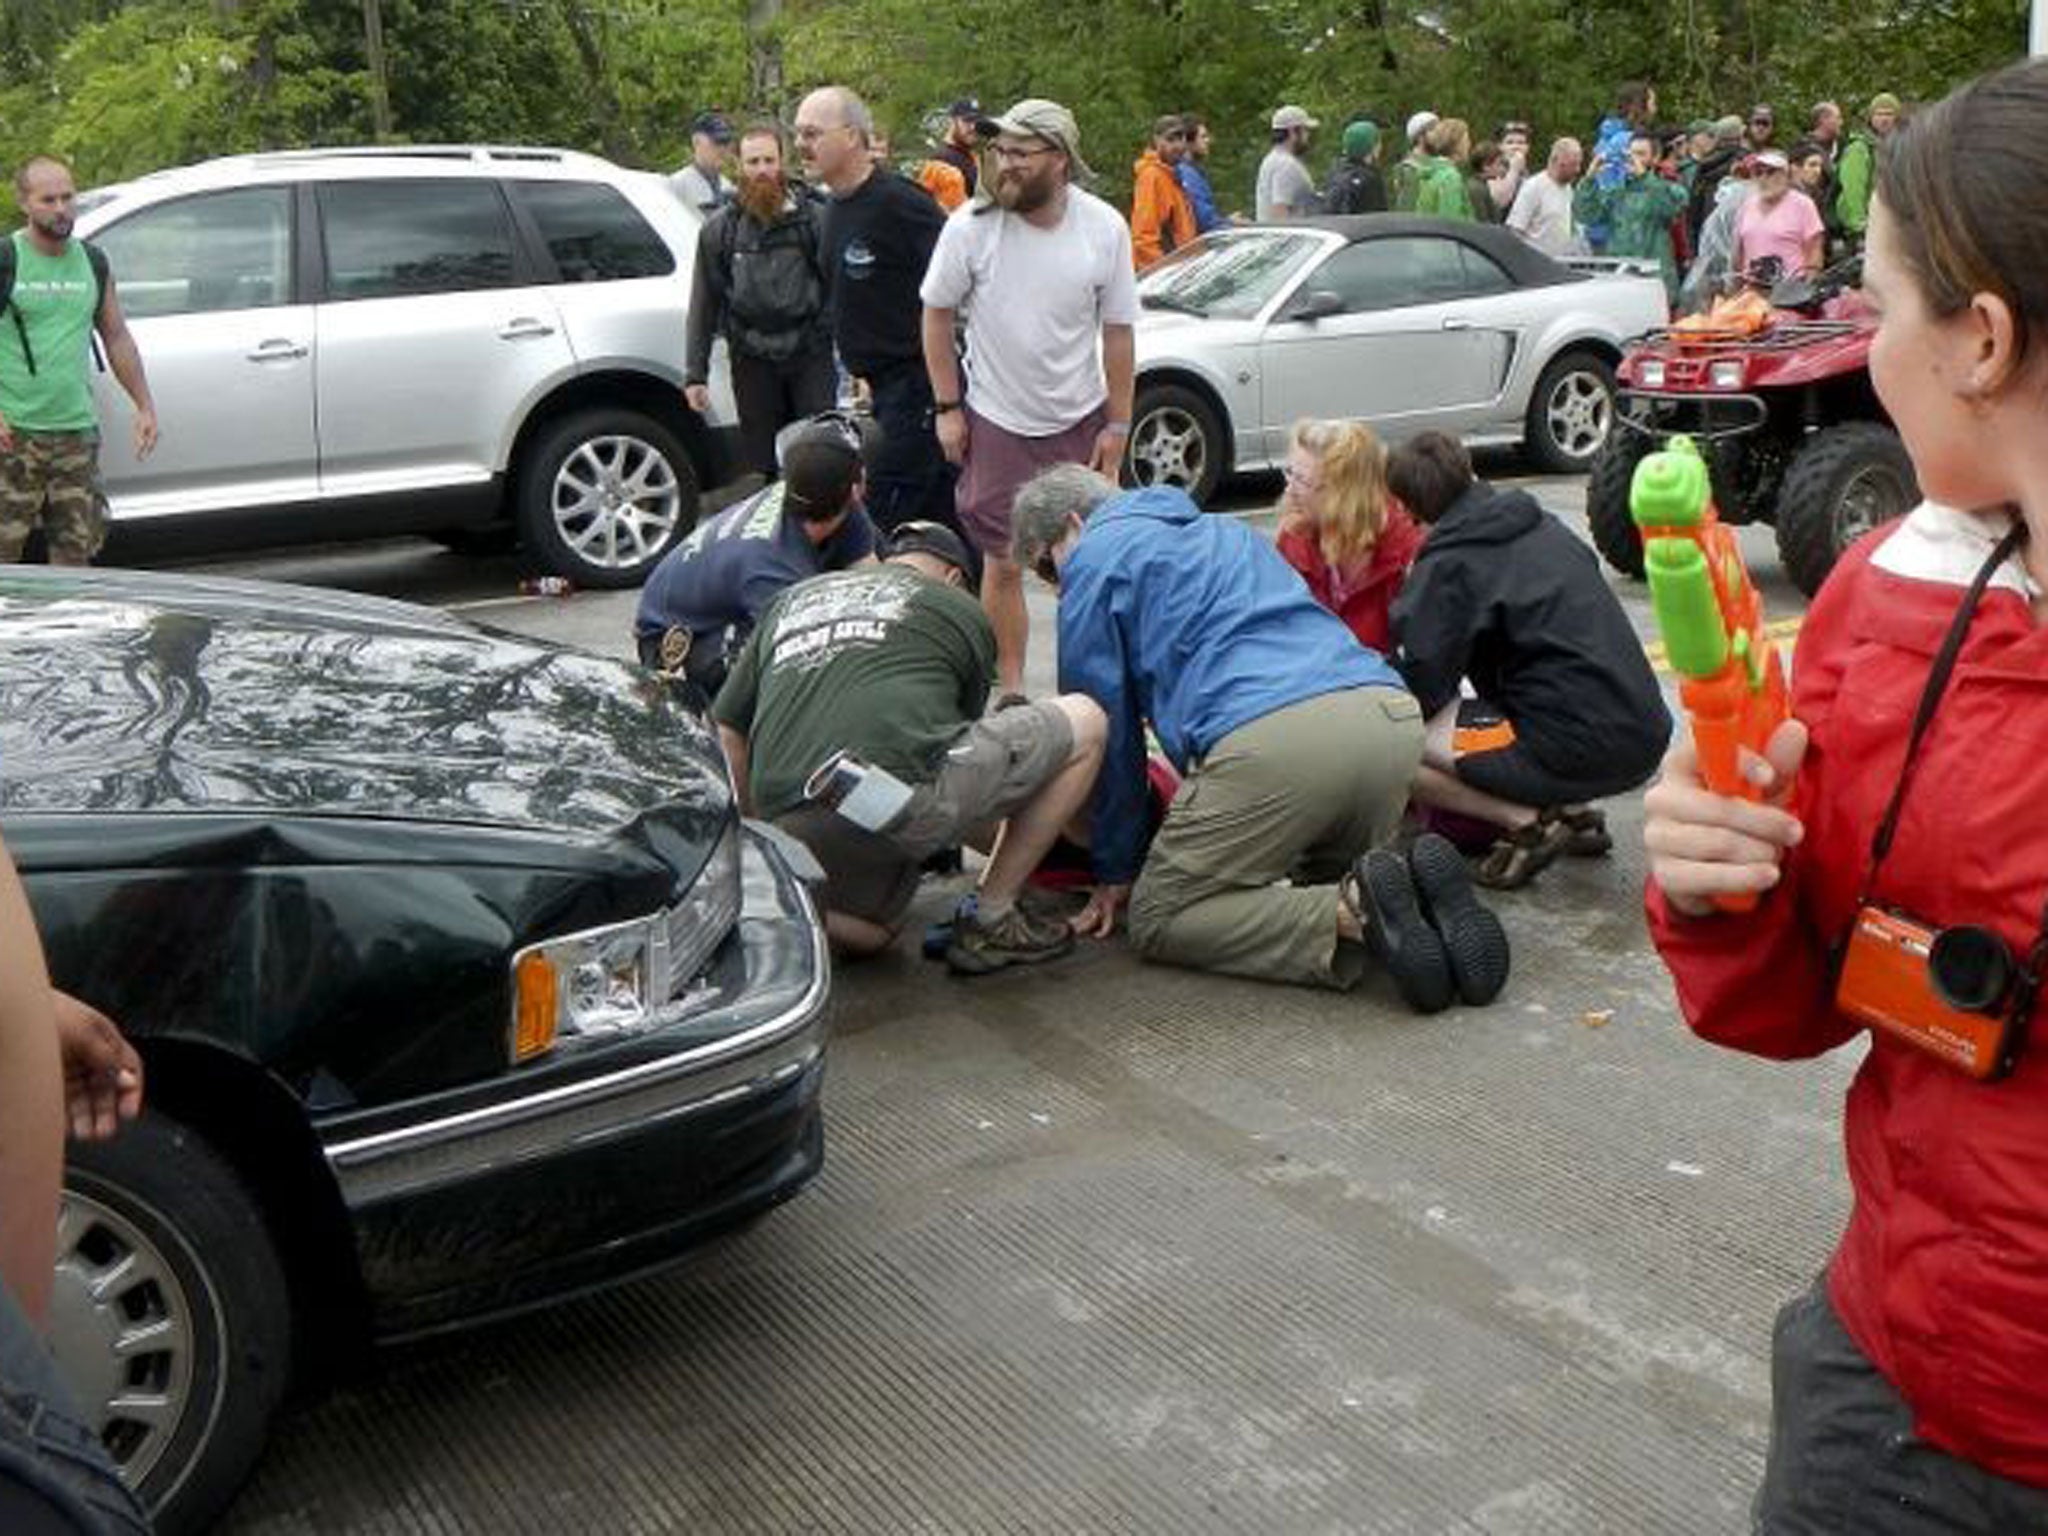 Up to 60 people were injured when a driver described by witnesses as an elderly man drove his car into a group of hikers marching in a parade in a small Virginia mountain town.